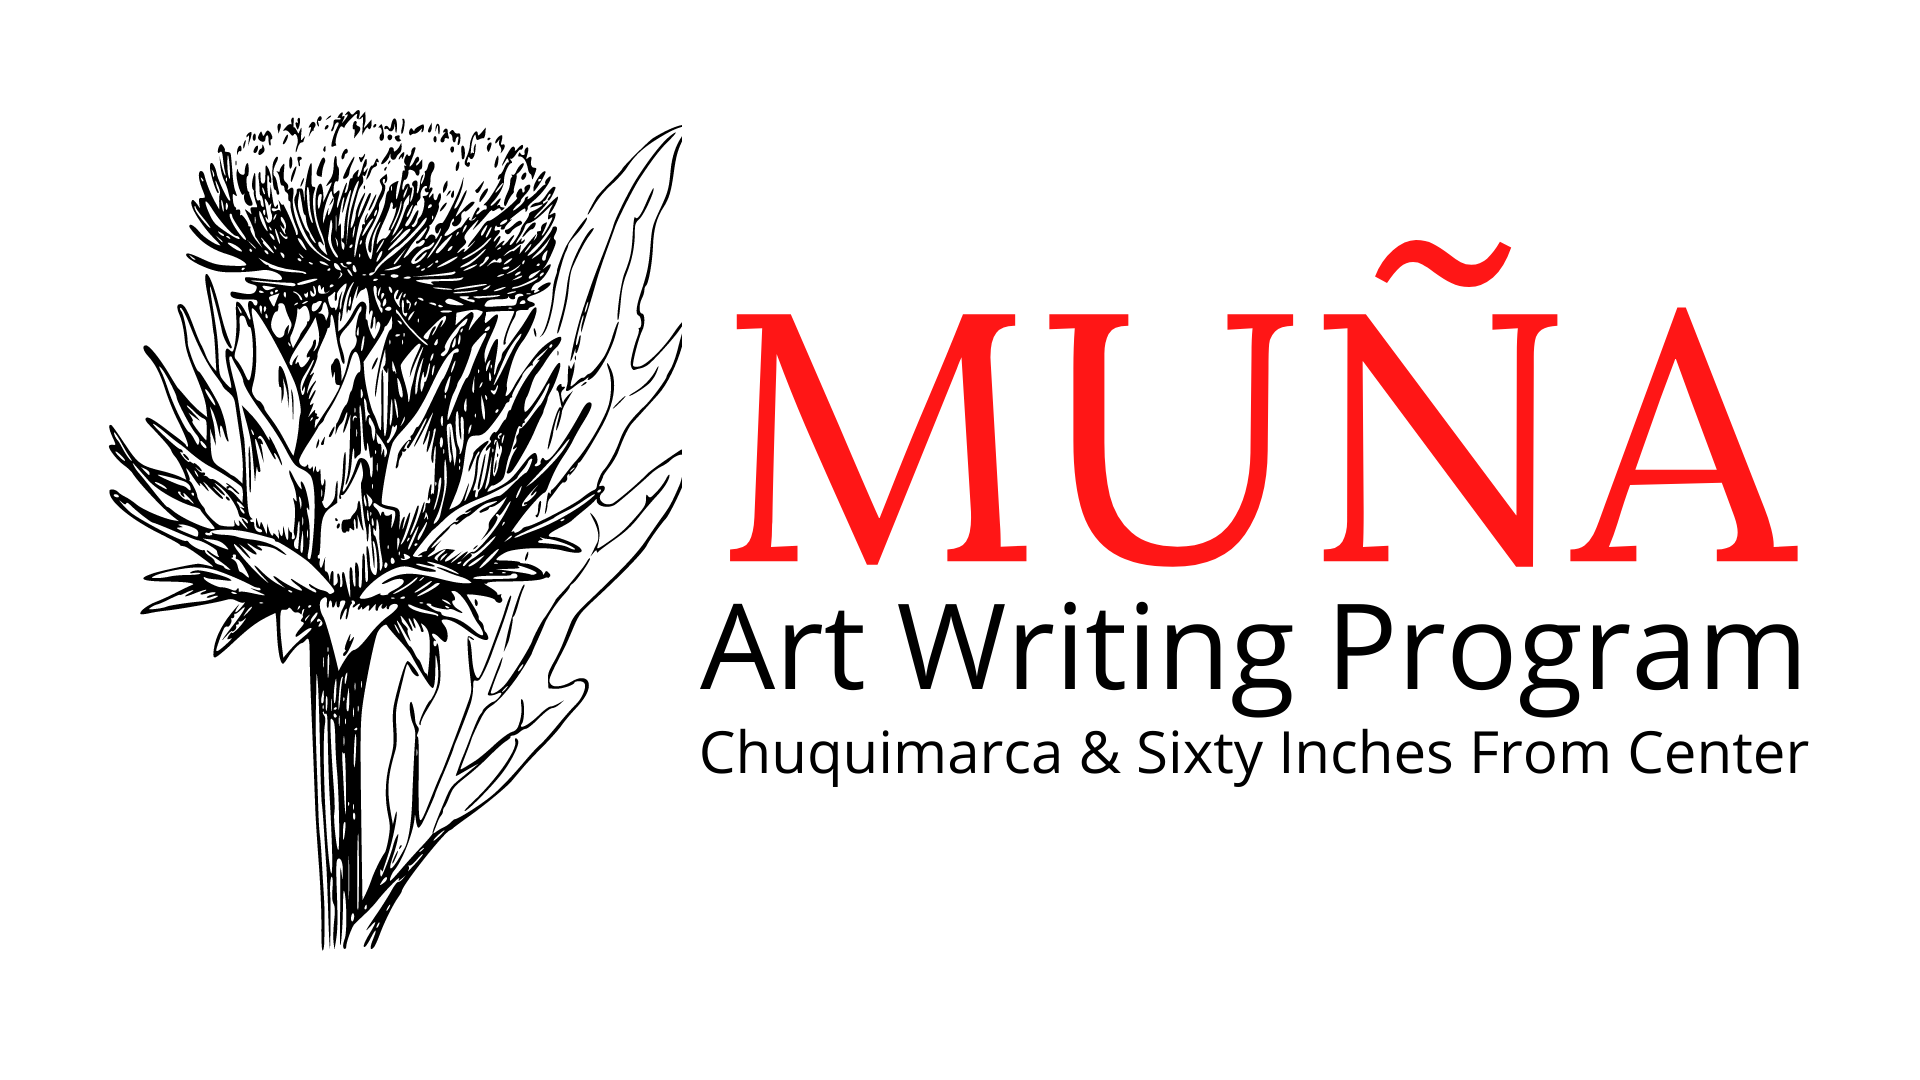 Featured image: A graphic with a black and white illustration of a flower on the right and black and red text on the left. The text reads: “Muña Art Writing Program Chuquimarca & Sixty Inches From Center”.